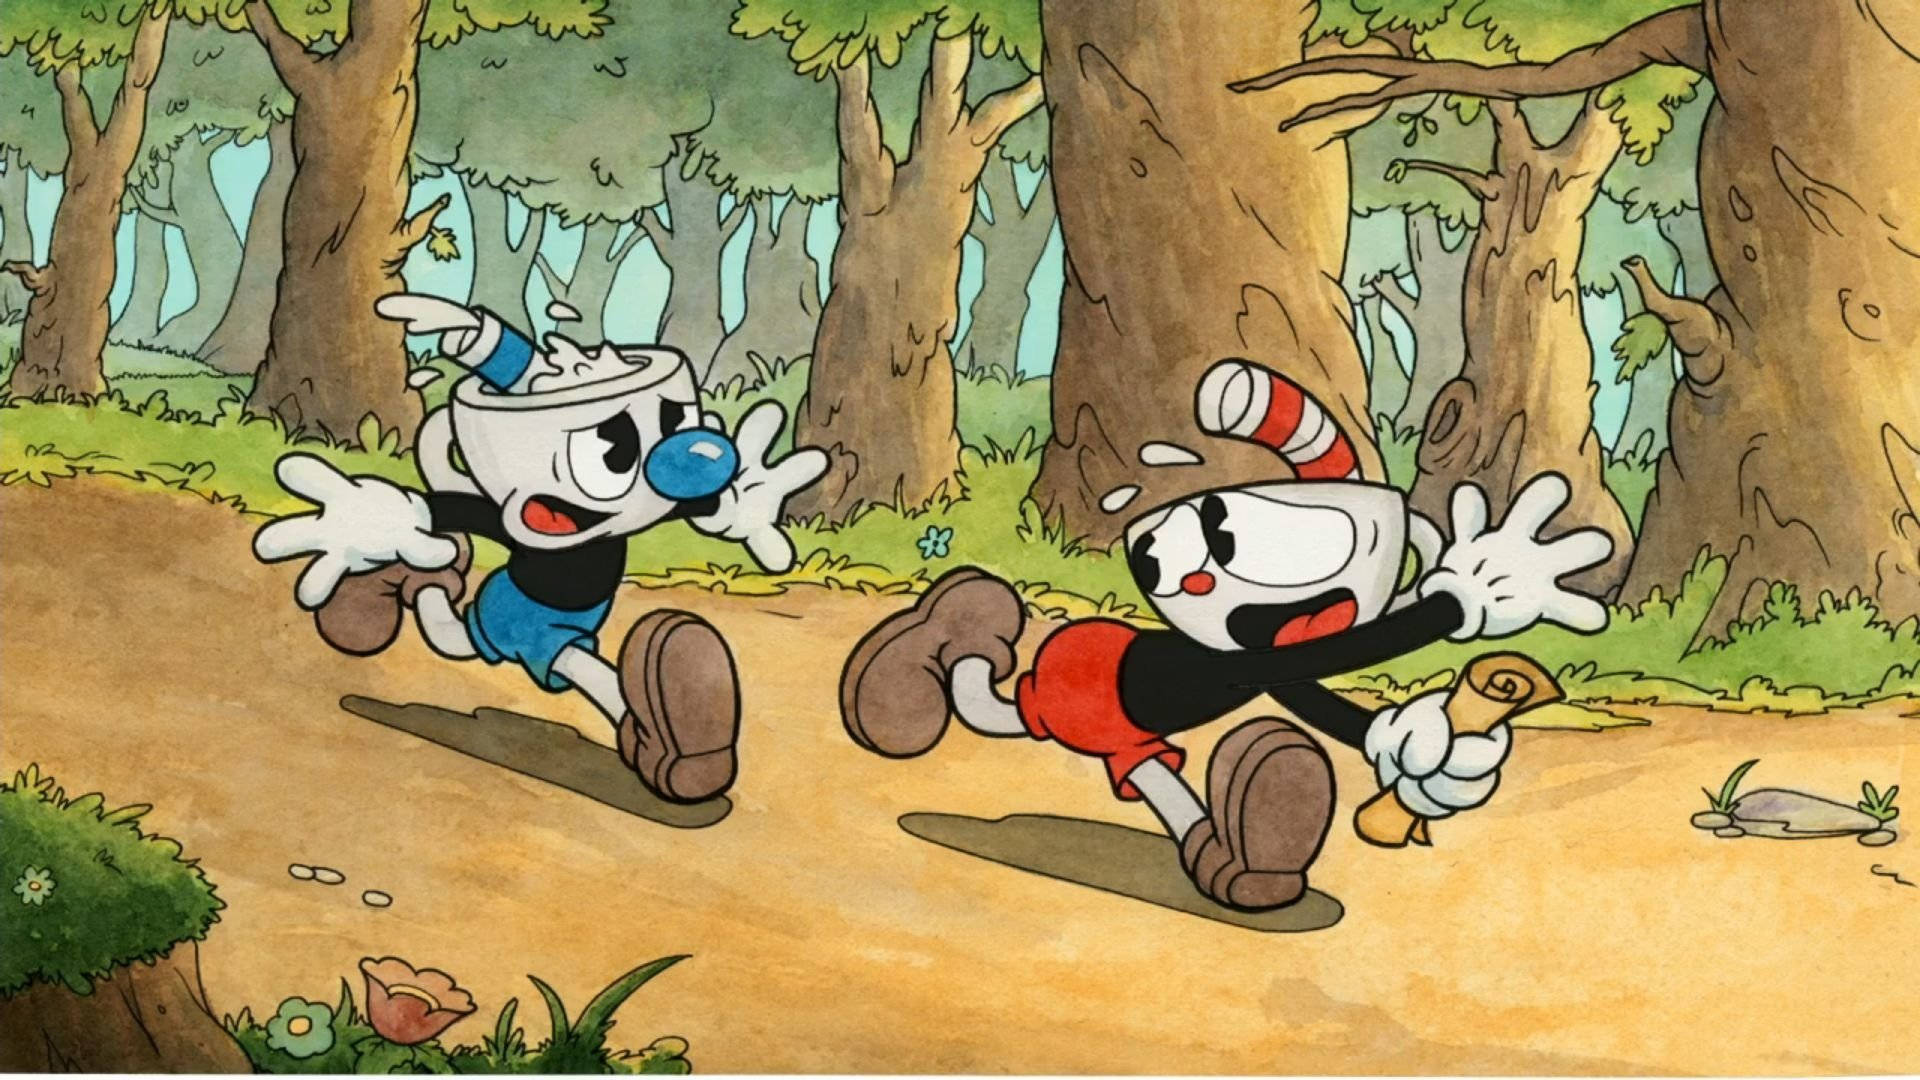 Cuphead and Mugman take a break in the tranquil forest Wallpaper